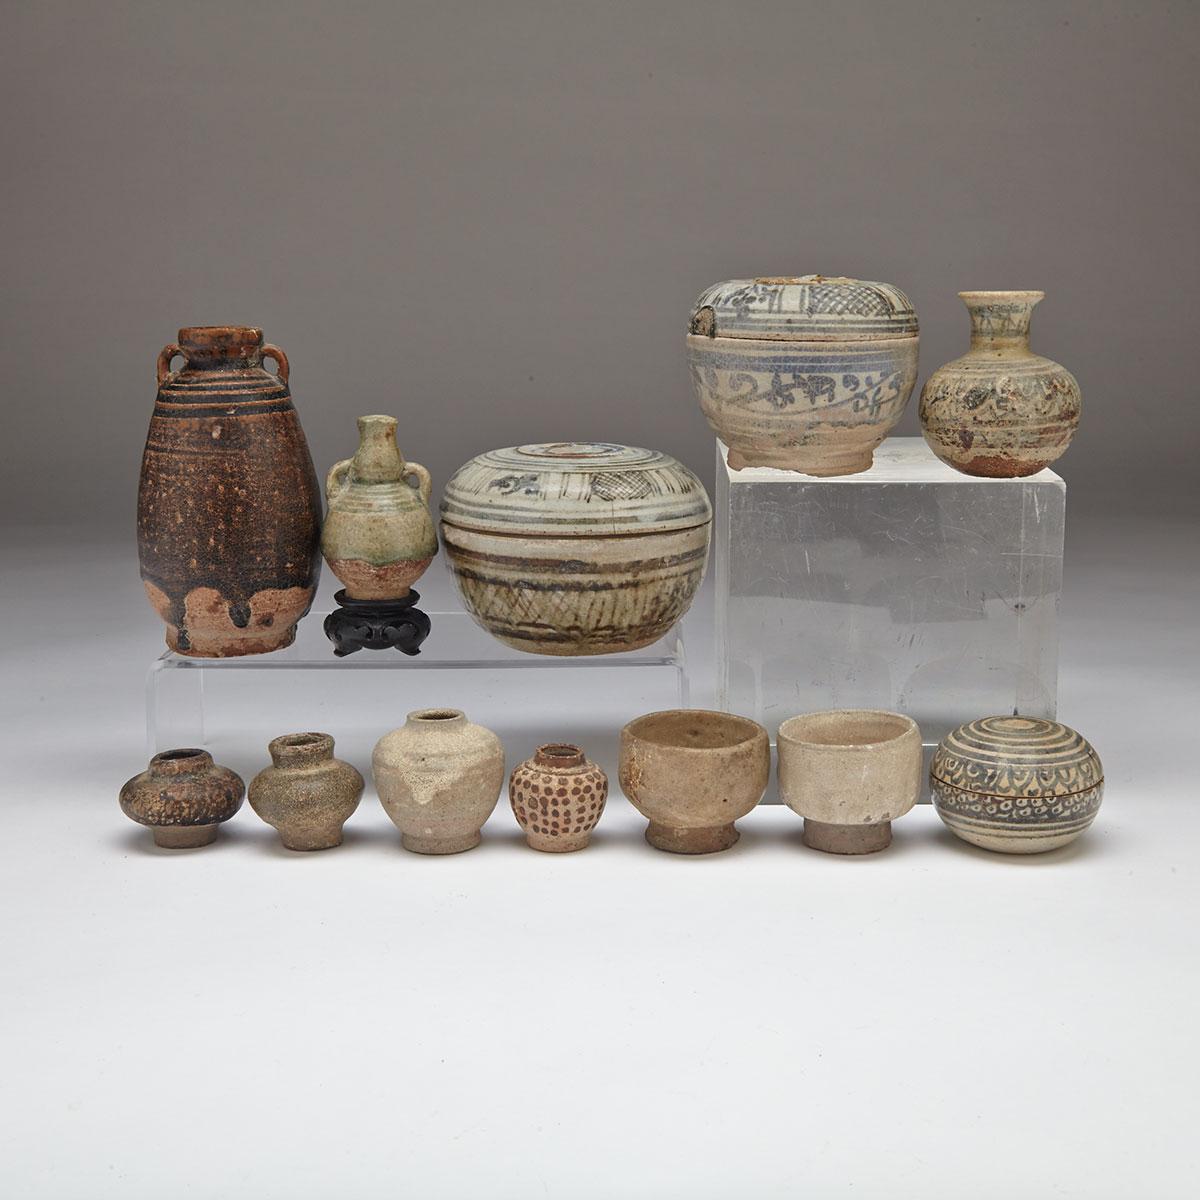 Group of  Twelve Porcelain Wares, 14th to 17th Century, South East Asia